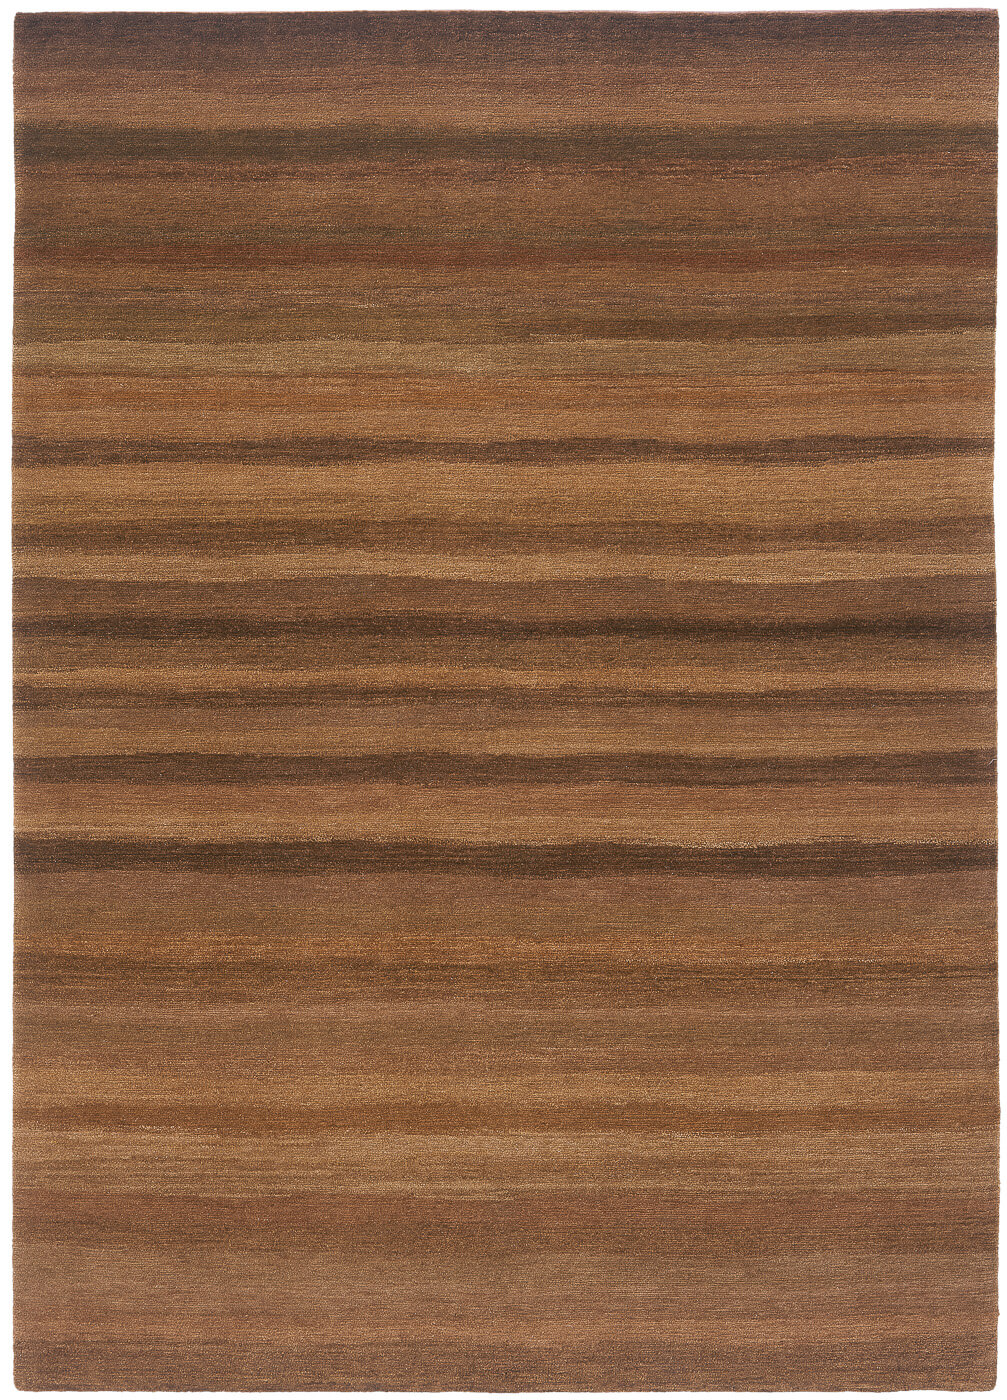 Brown Striped Hand-Knotted Rug